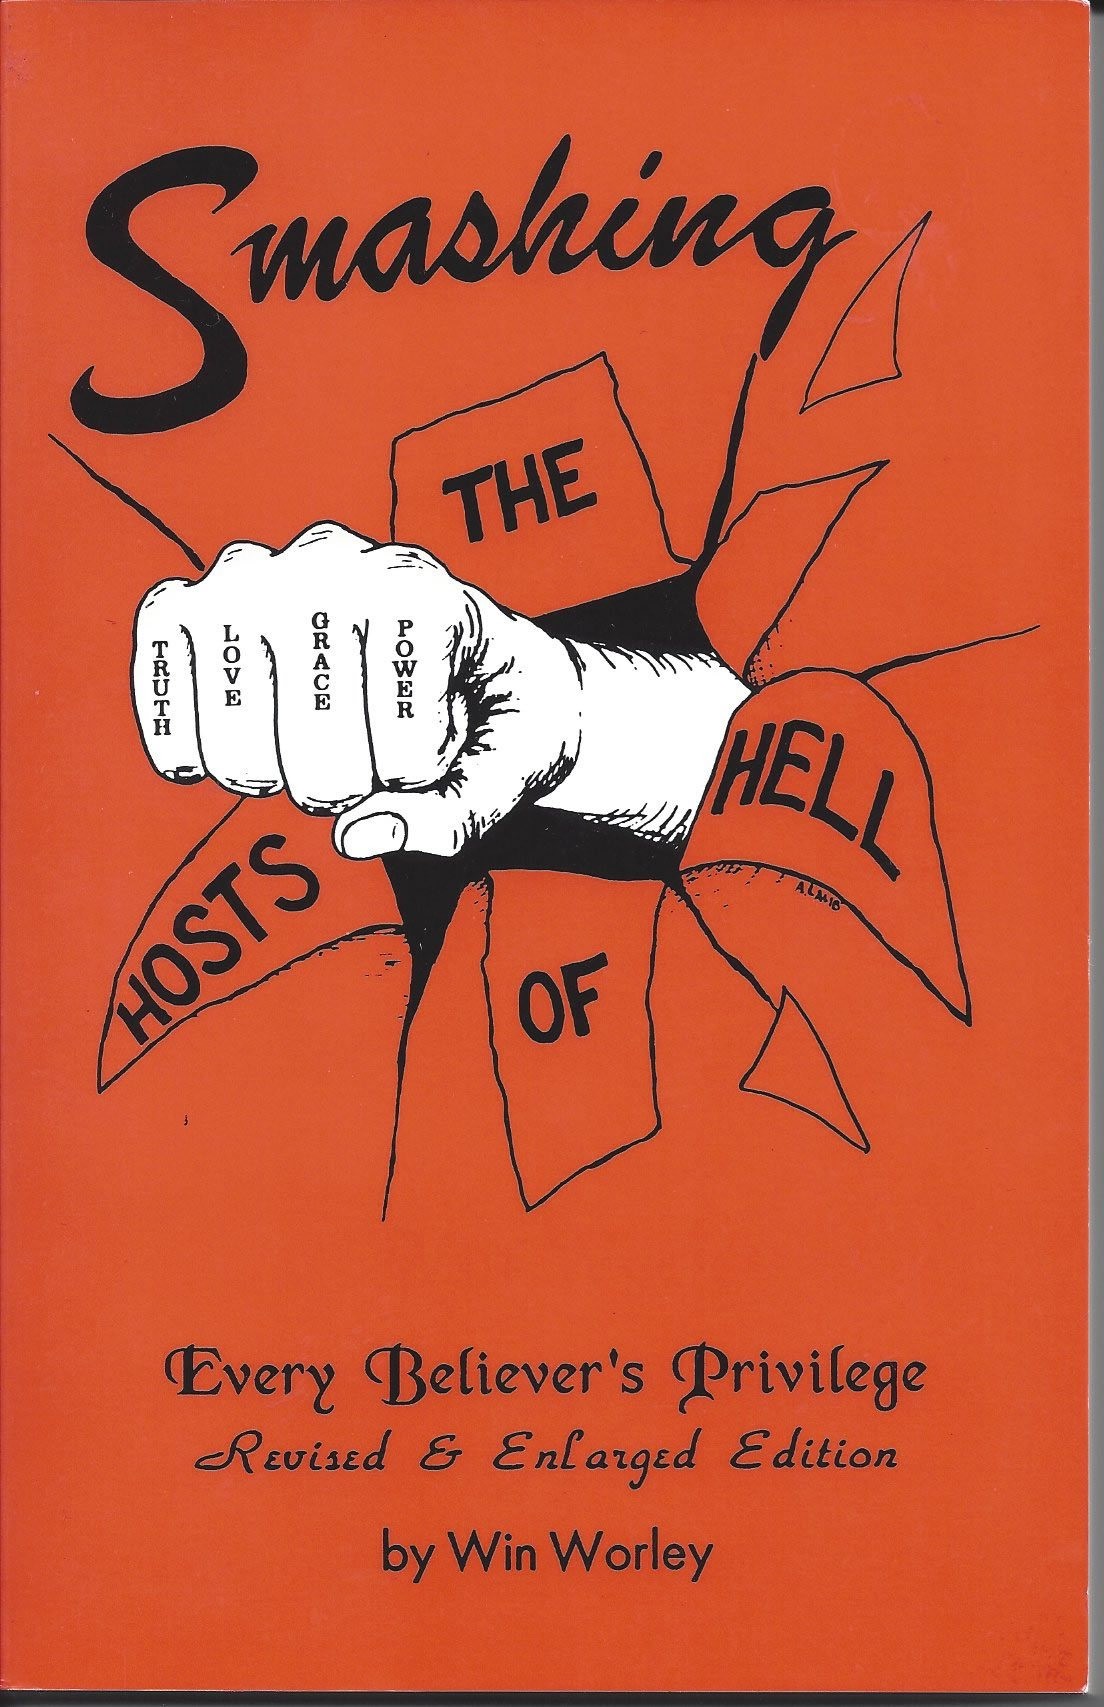 Smashing the Hosts of Hell – Every Believer’s Privilege